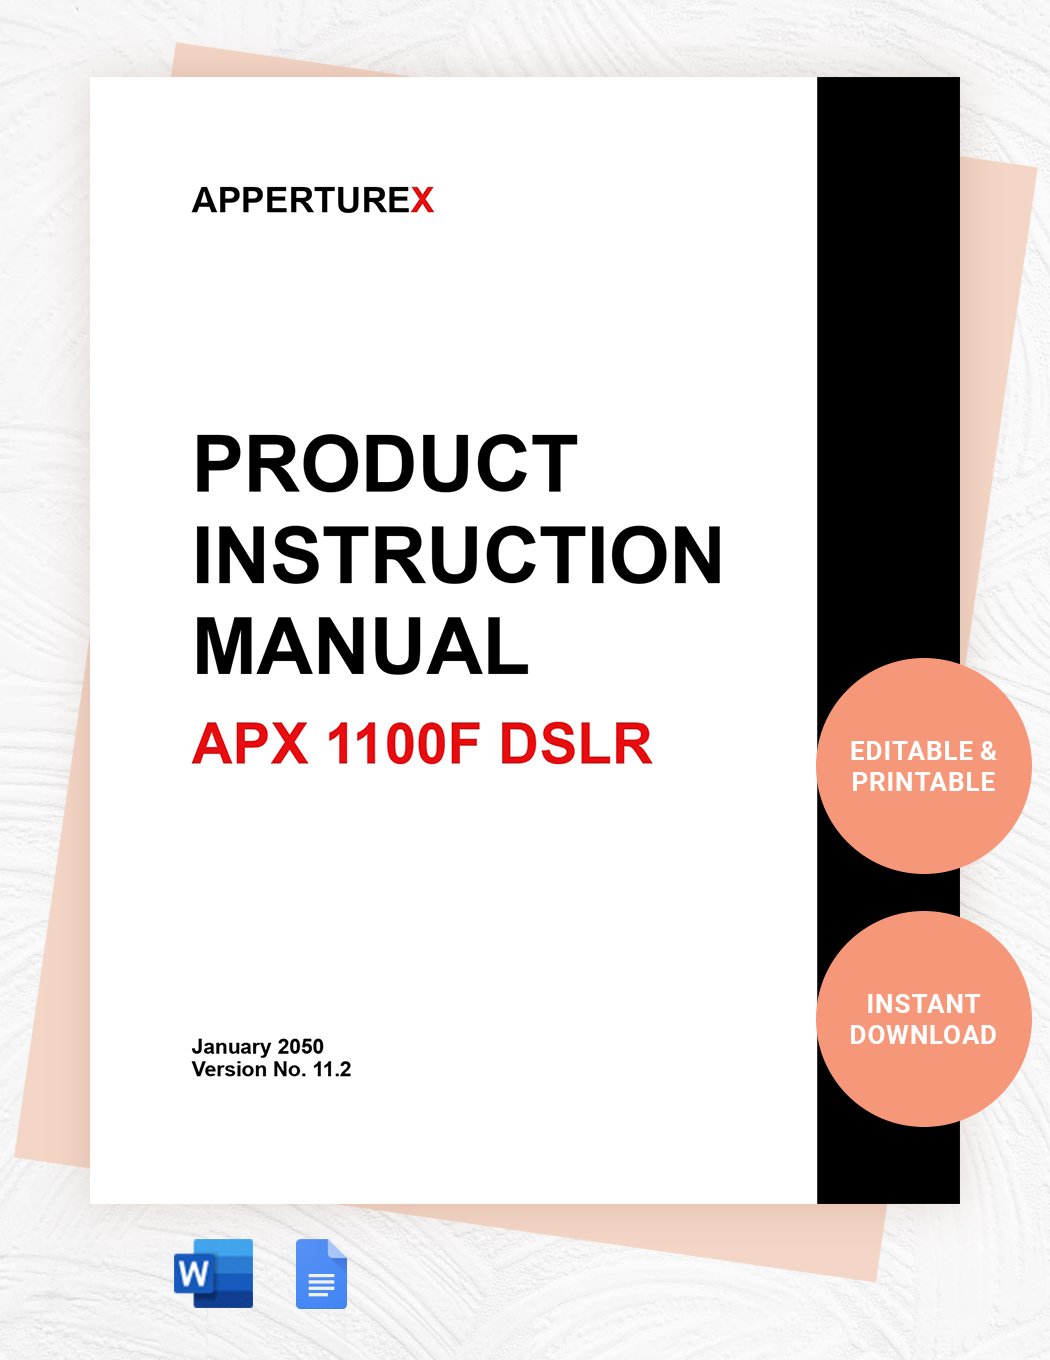 Product Instructions Template